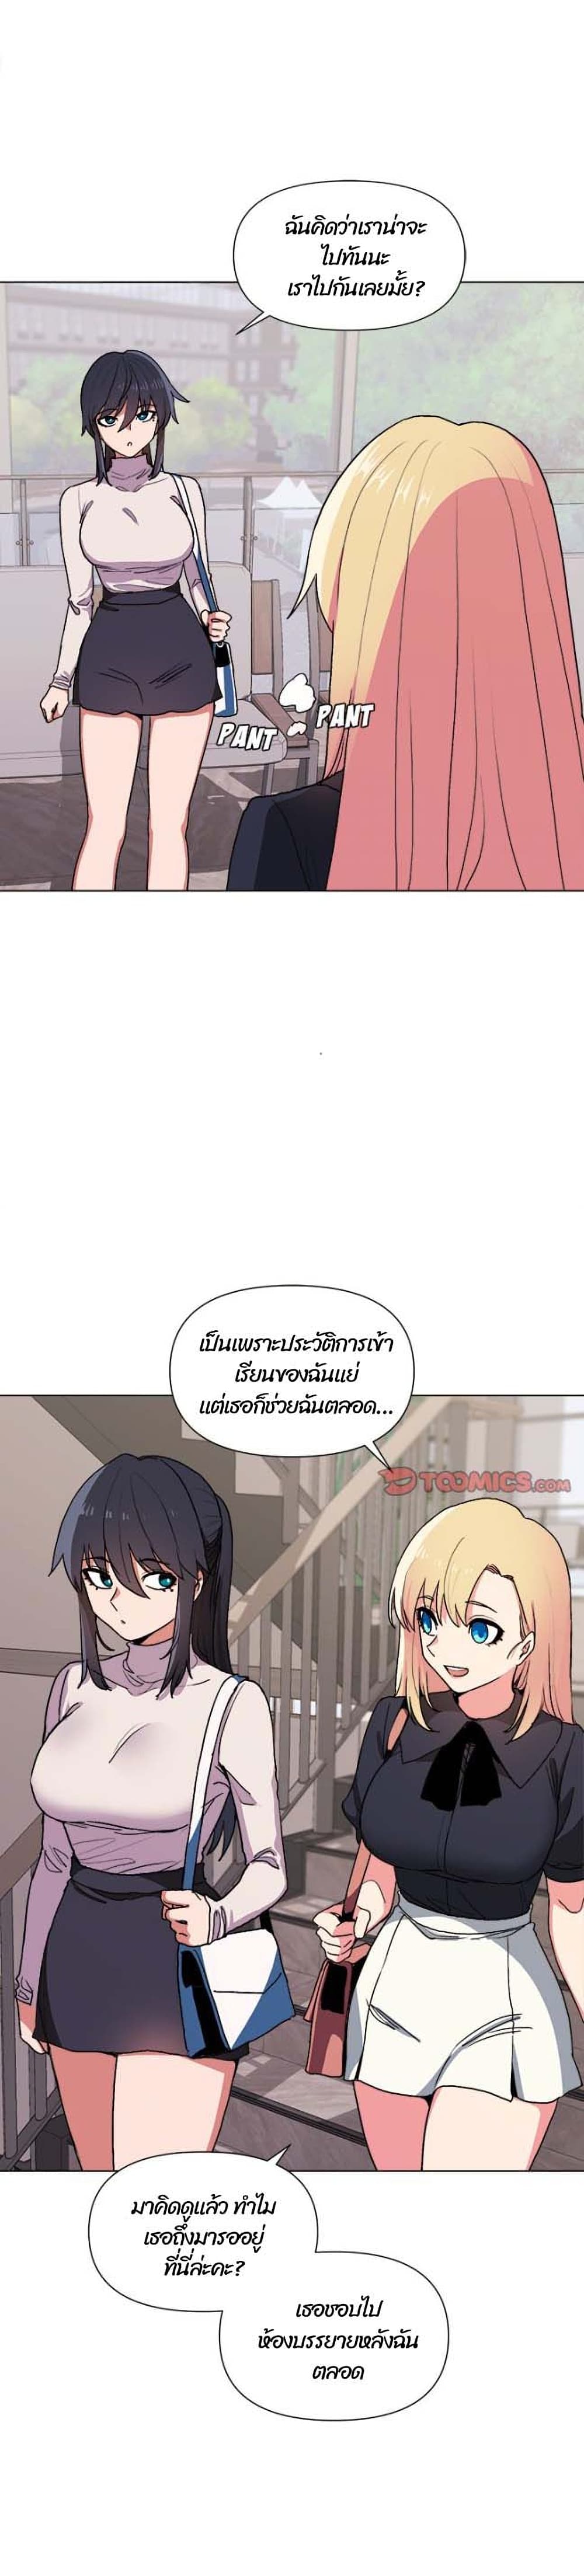 College Life Starts With Clubs 14 ภาพที่ 14